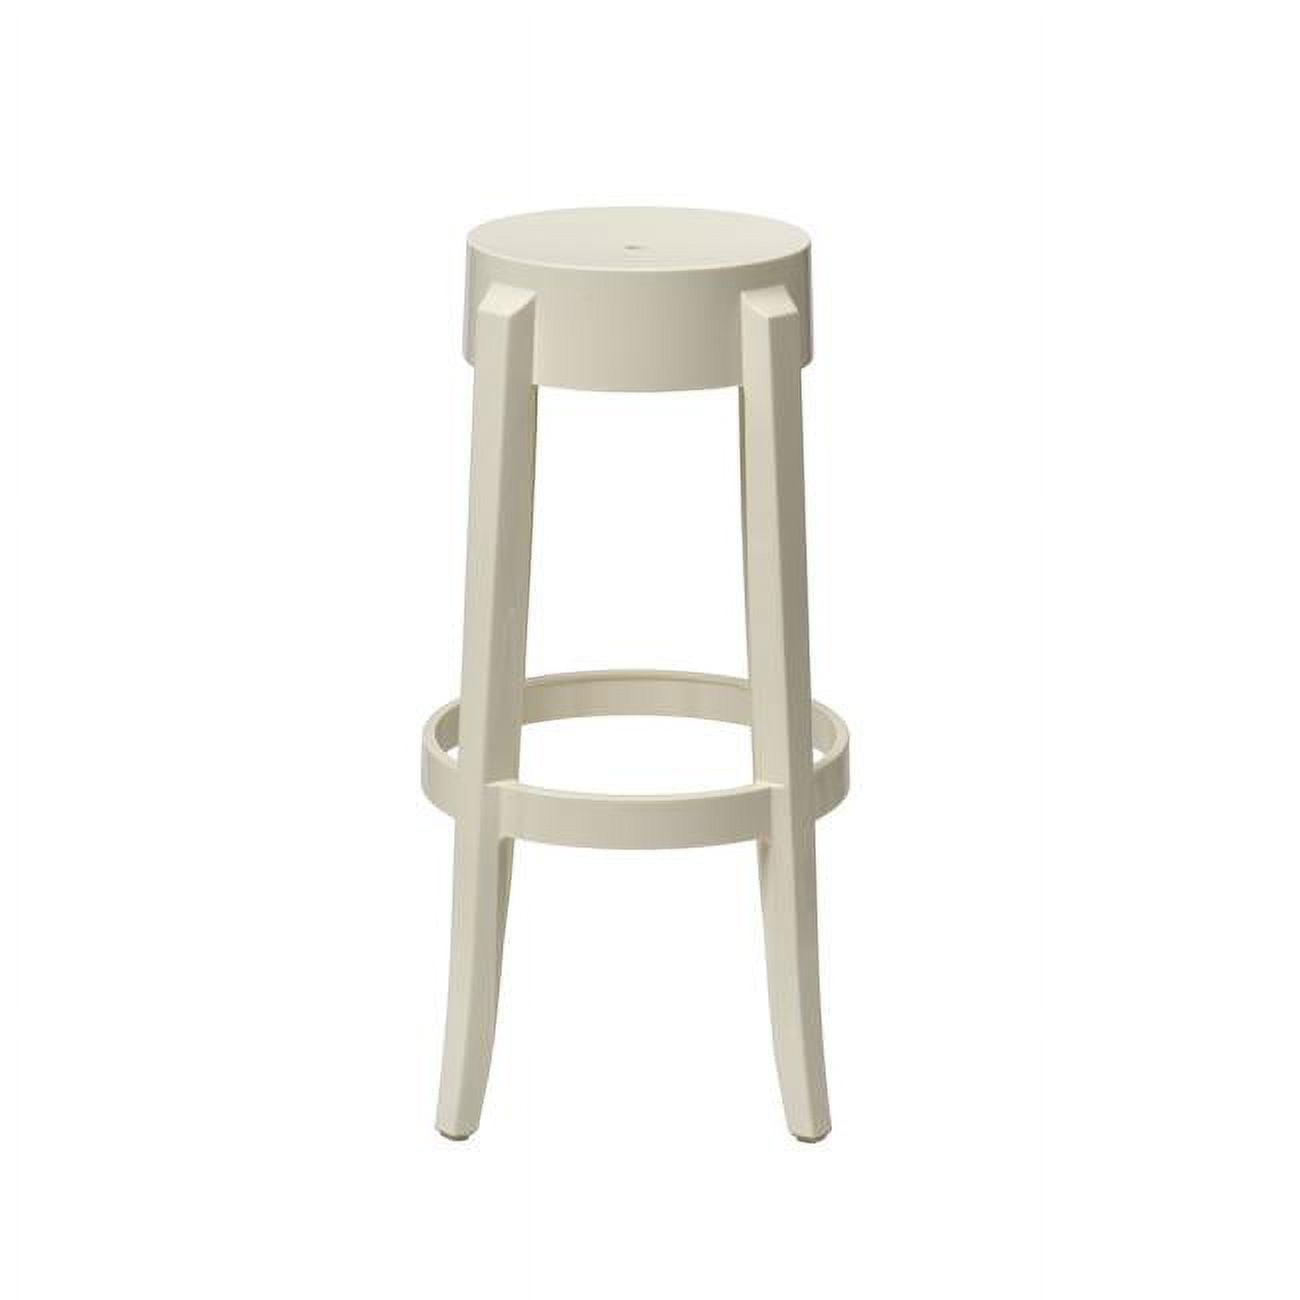 Rpc-kage-stool-sw Polycarbonate Bar Height Backless Kage Stool, Creamy White - 30 In.